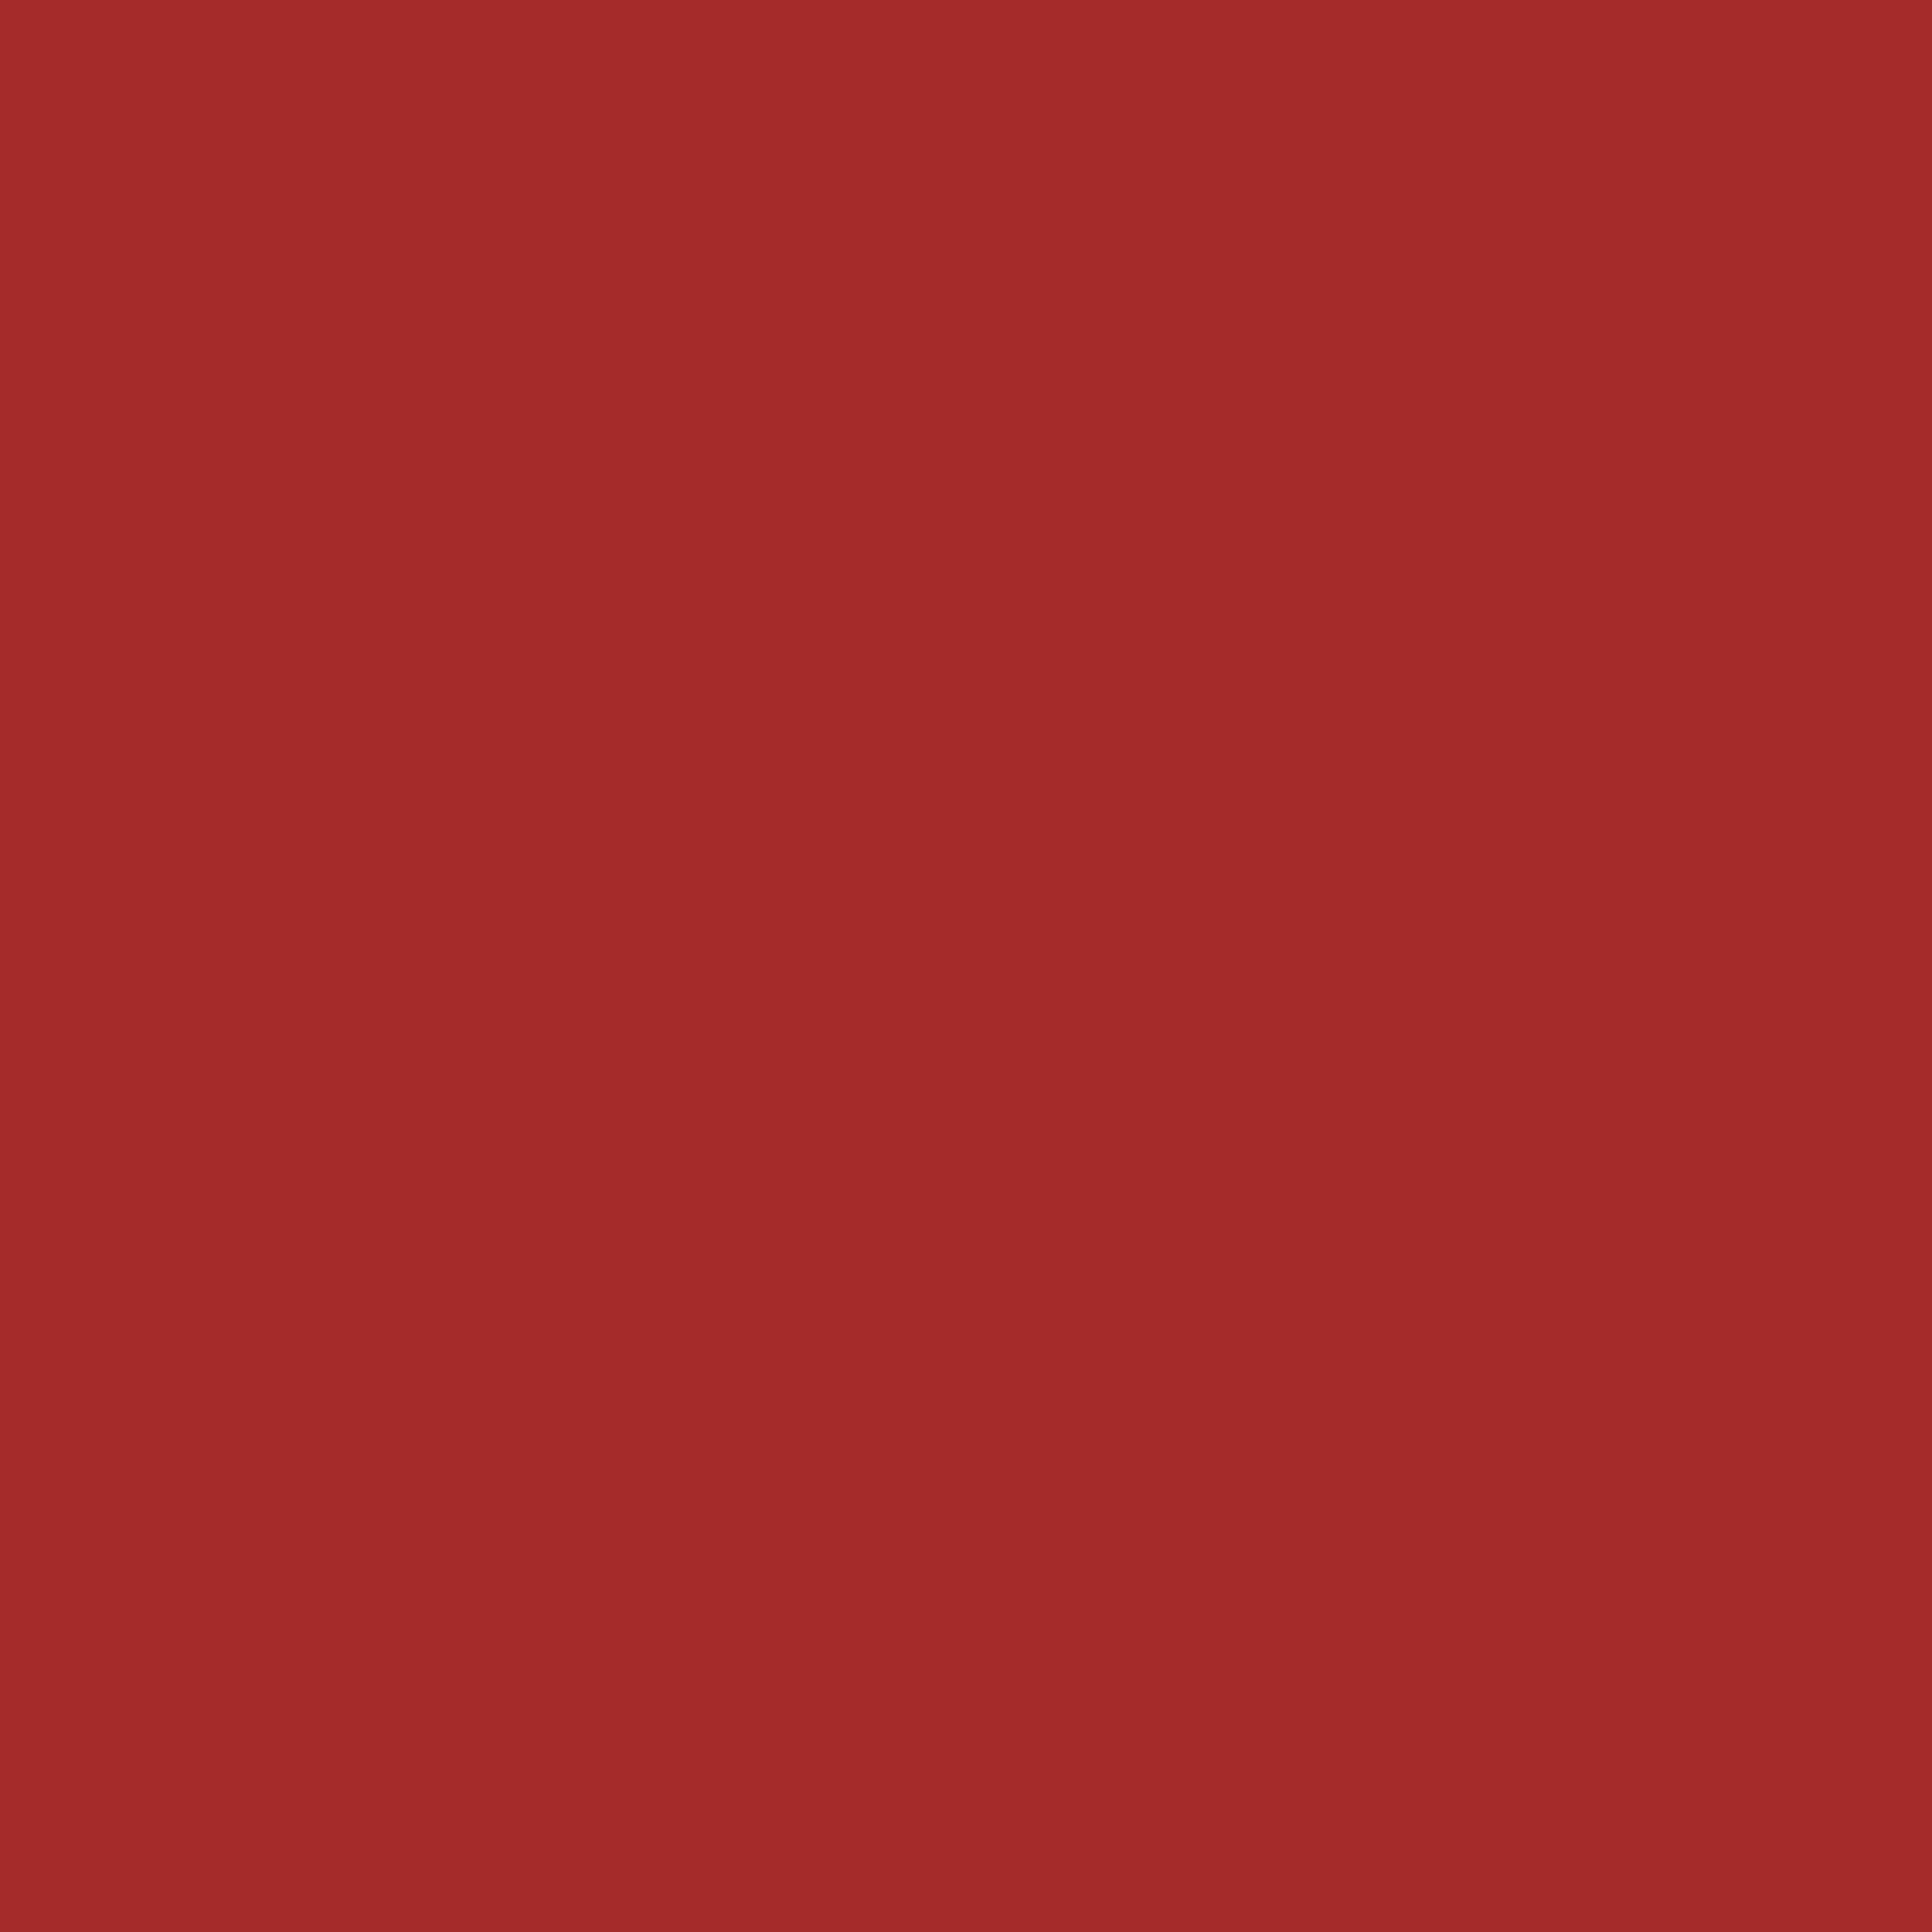 2048x2048 Red-brown Solid Color Background